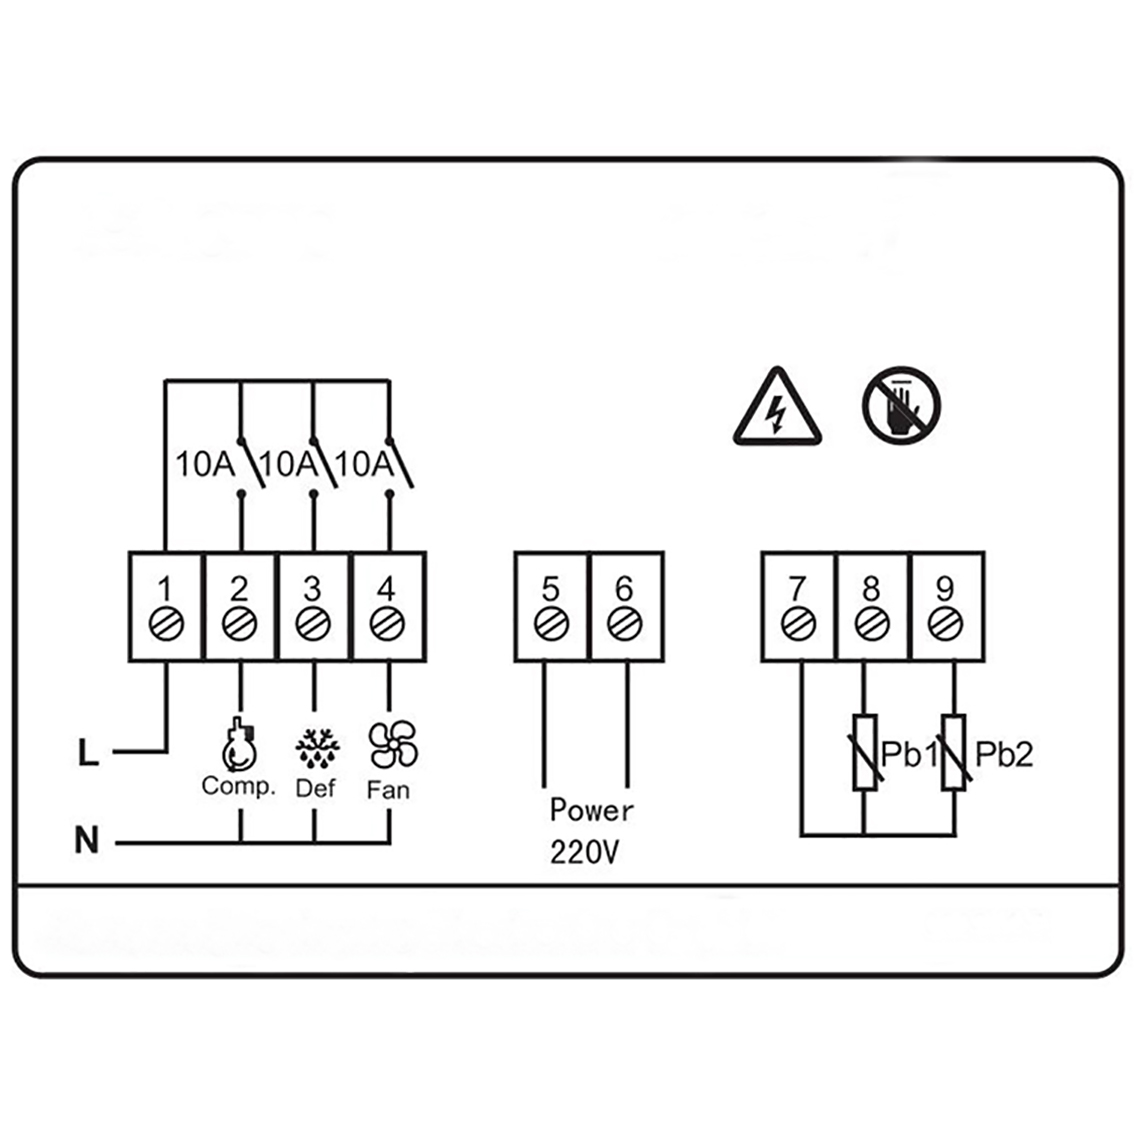 Thermostat Temperature Controller for Cold Storage Freezers